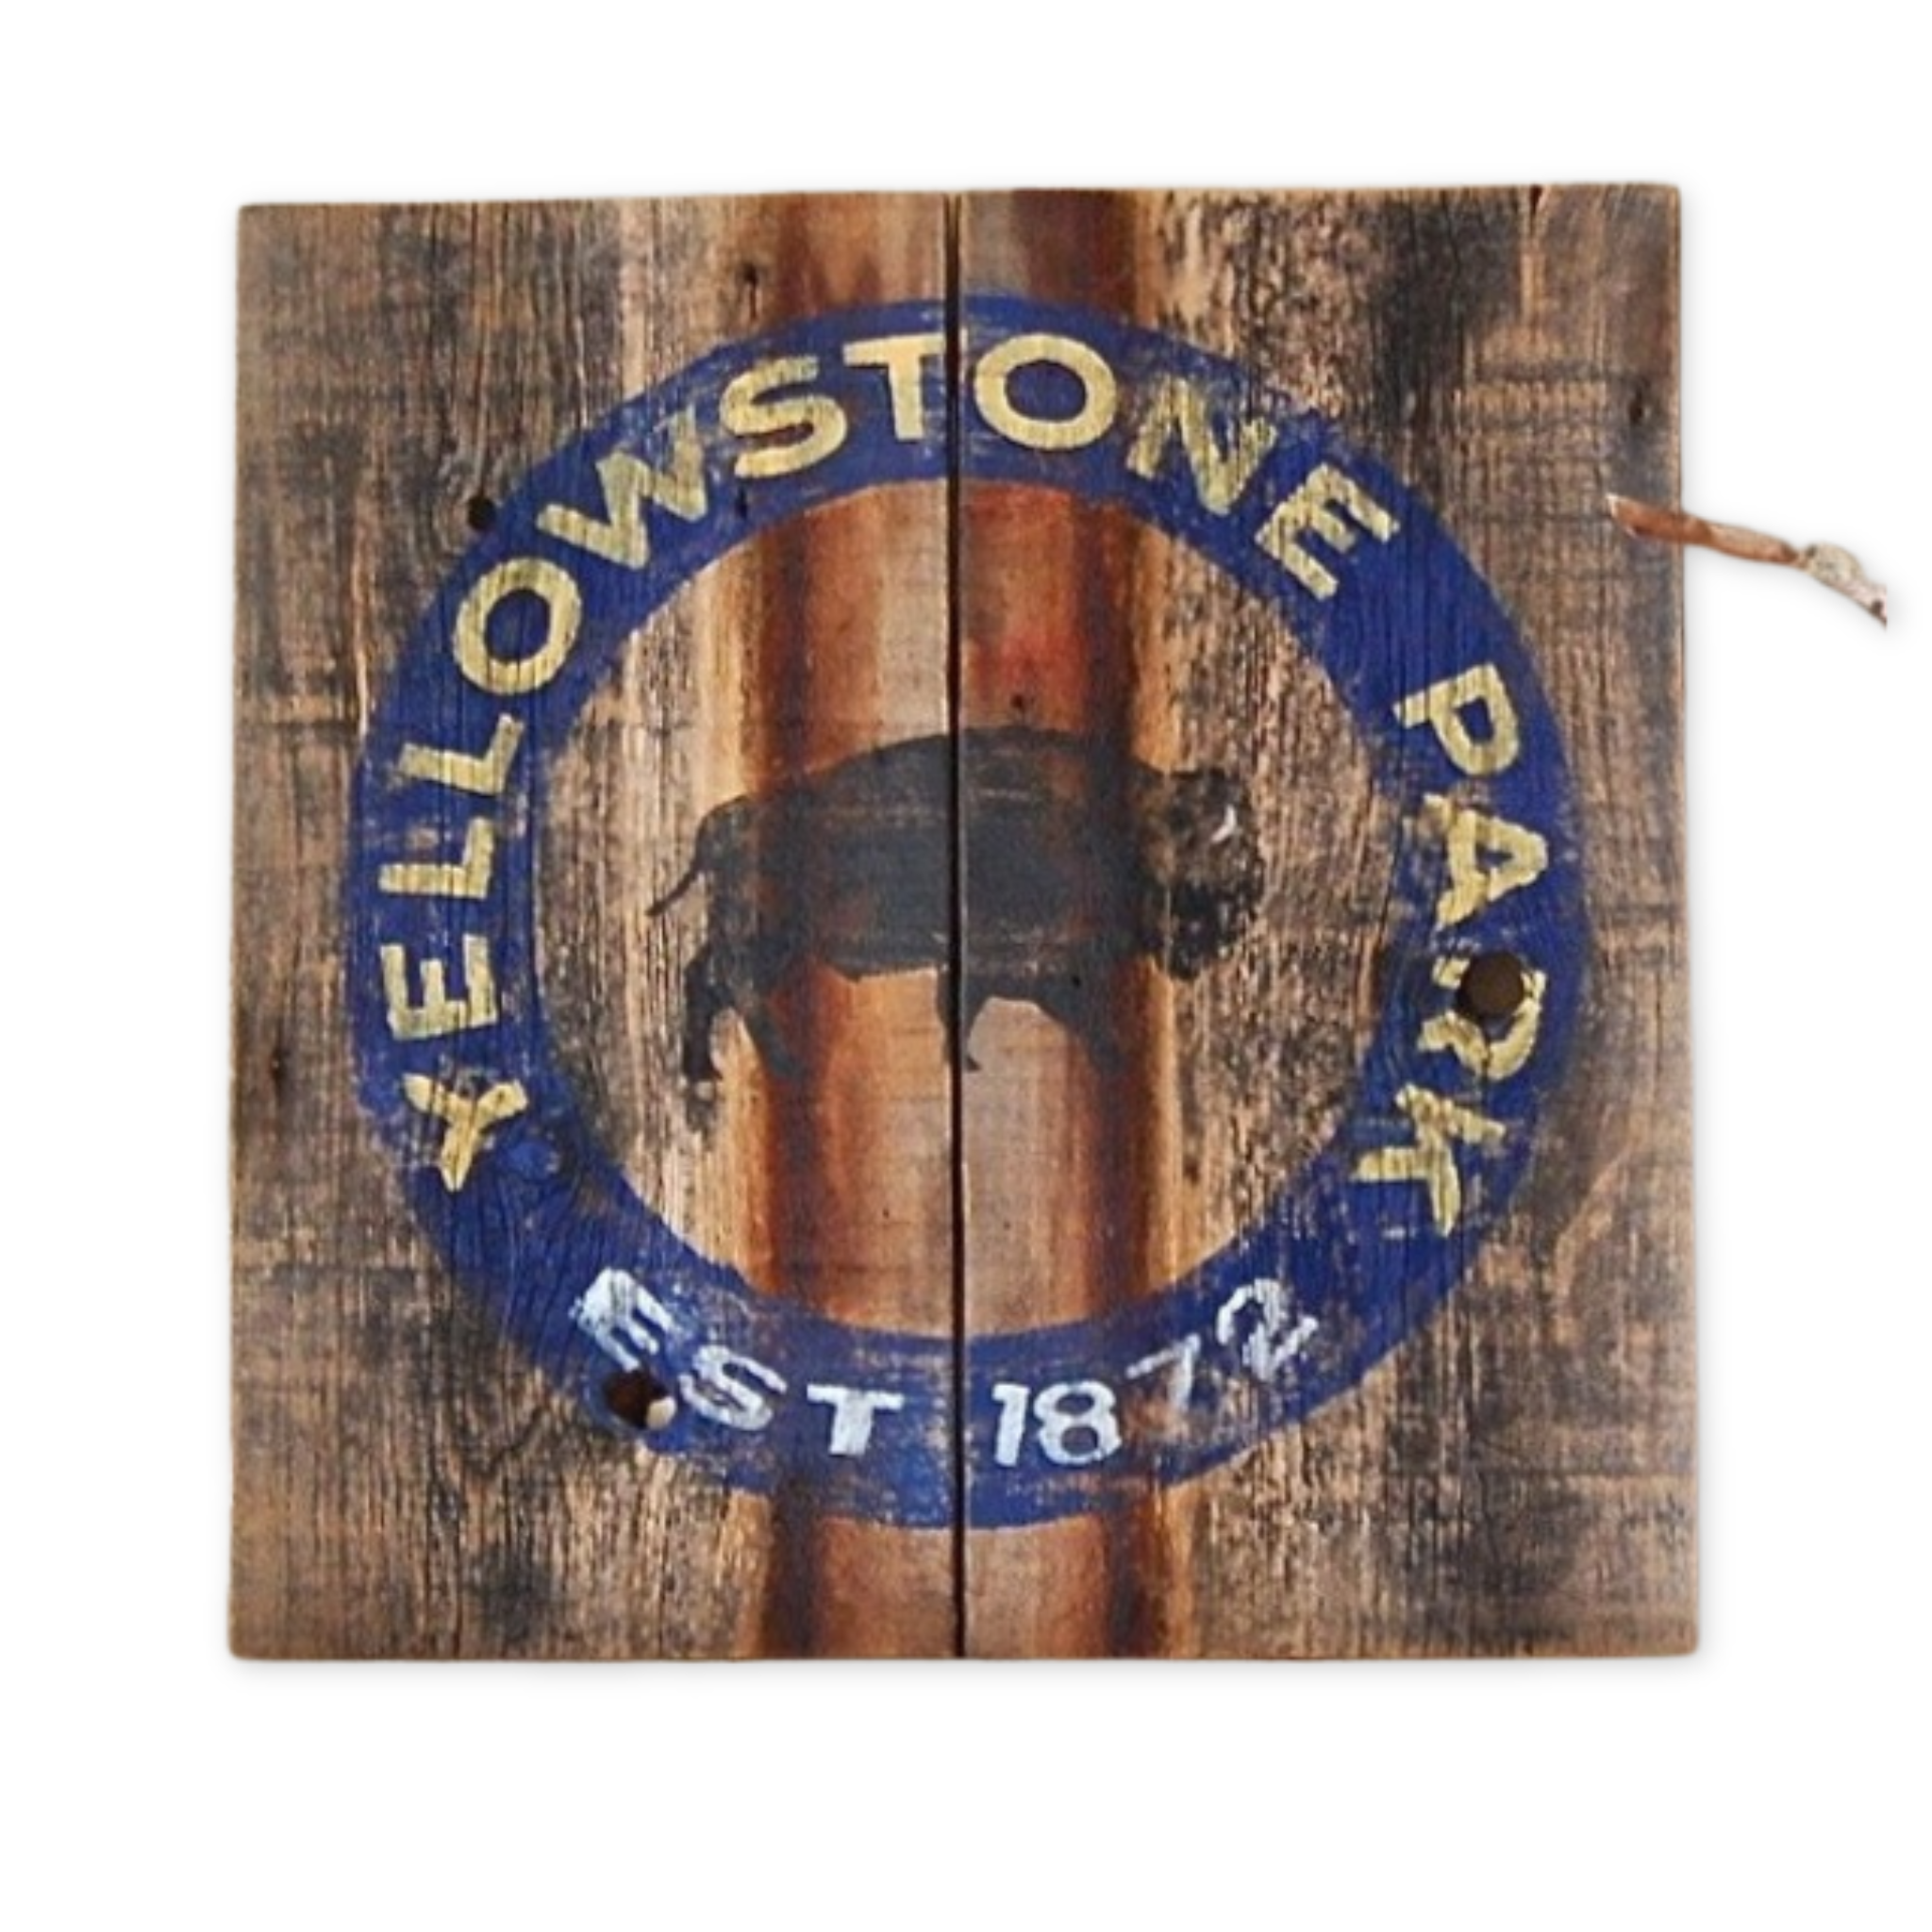 rustic wooden sign with an image of a bison and the words yellowstone national park printed on it